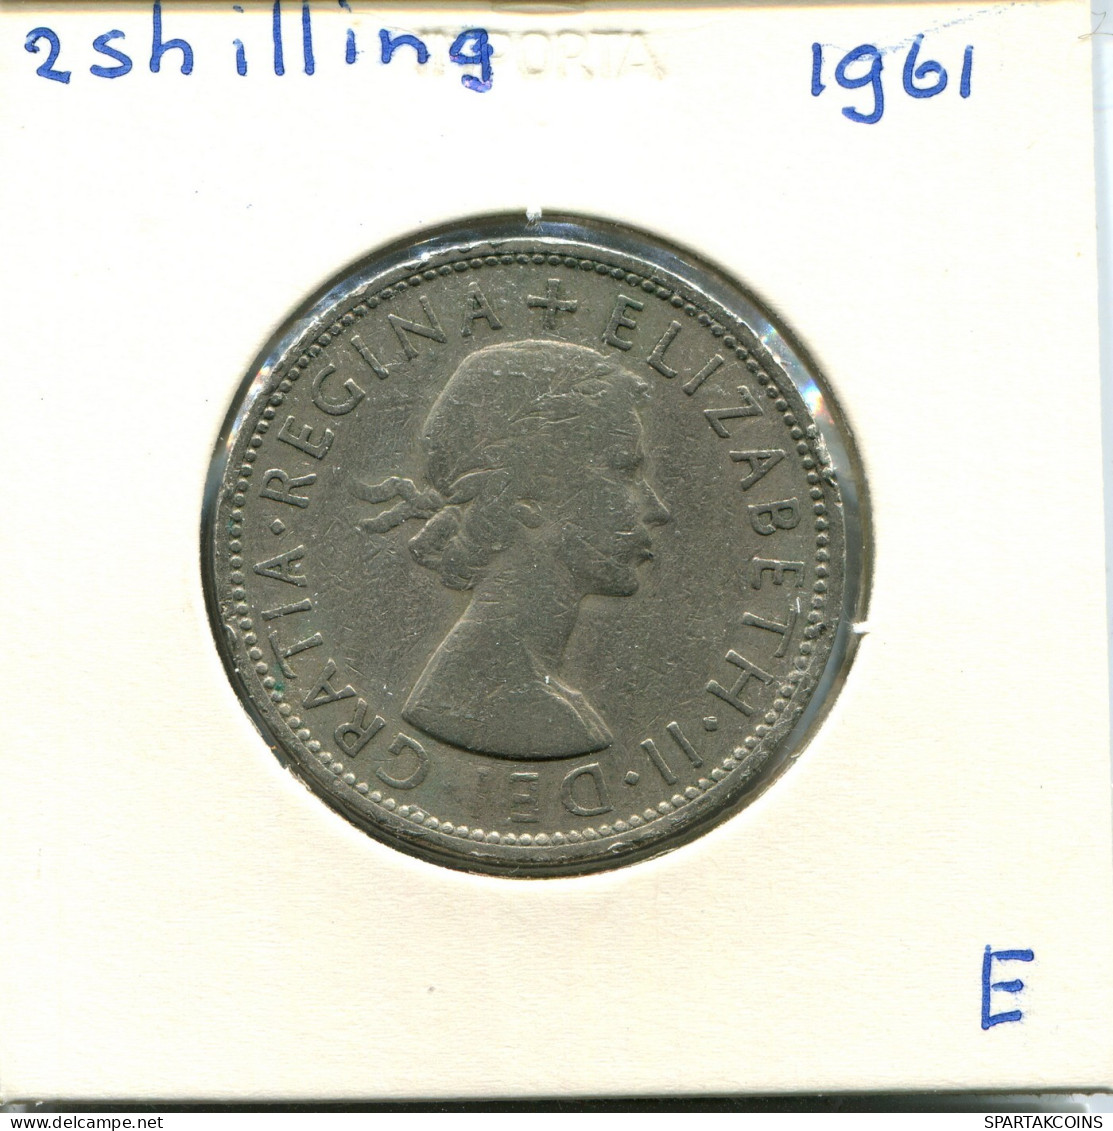 2 SHILLING 1961 UK GREAT BRITAIN Coin #AW997.U.A - J. 1 Florin / 2 Schillings